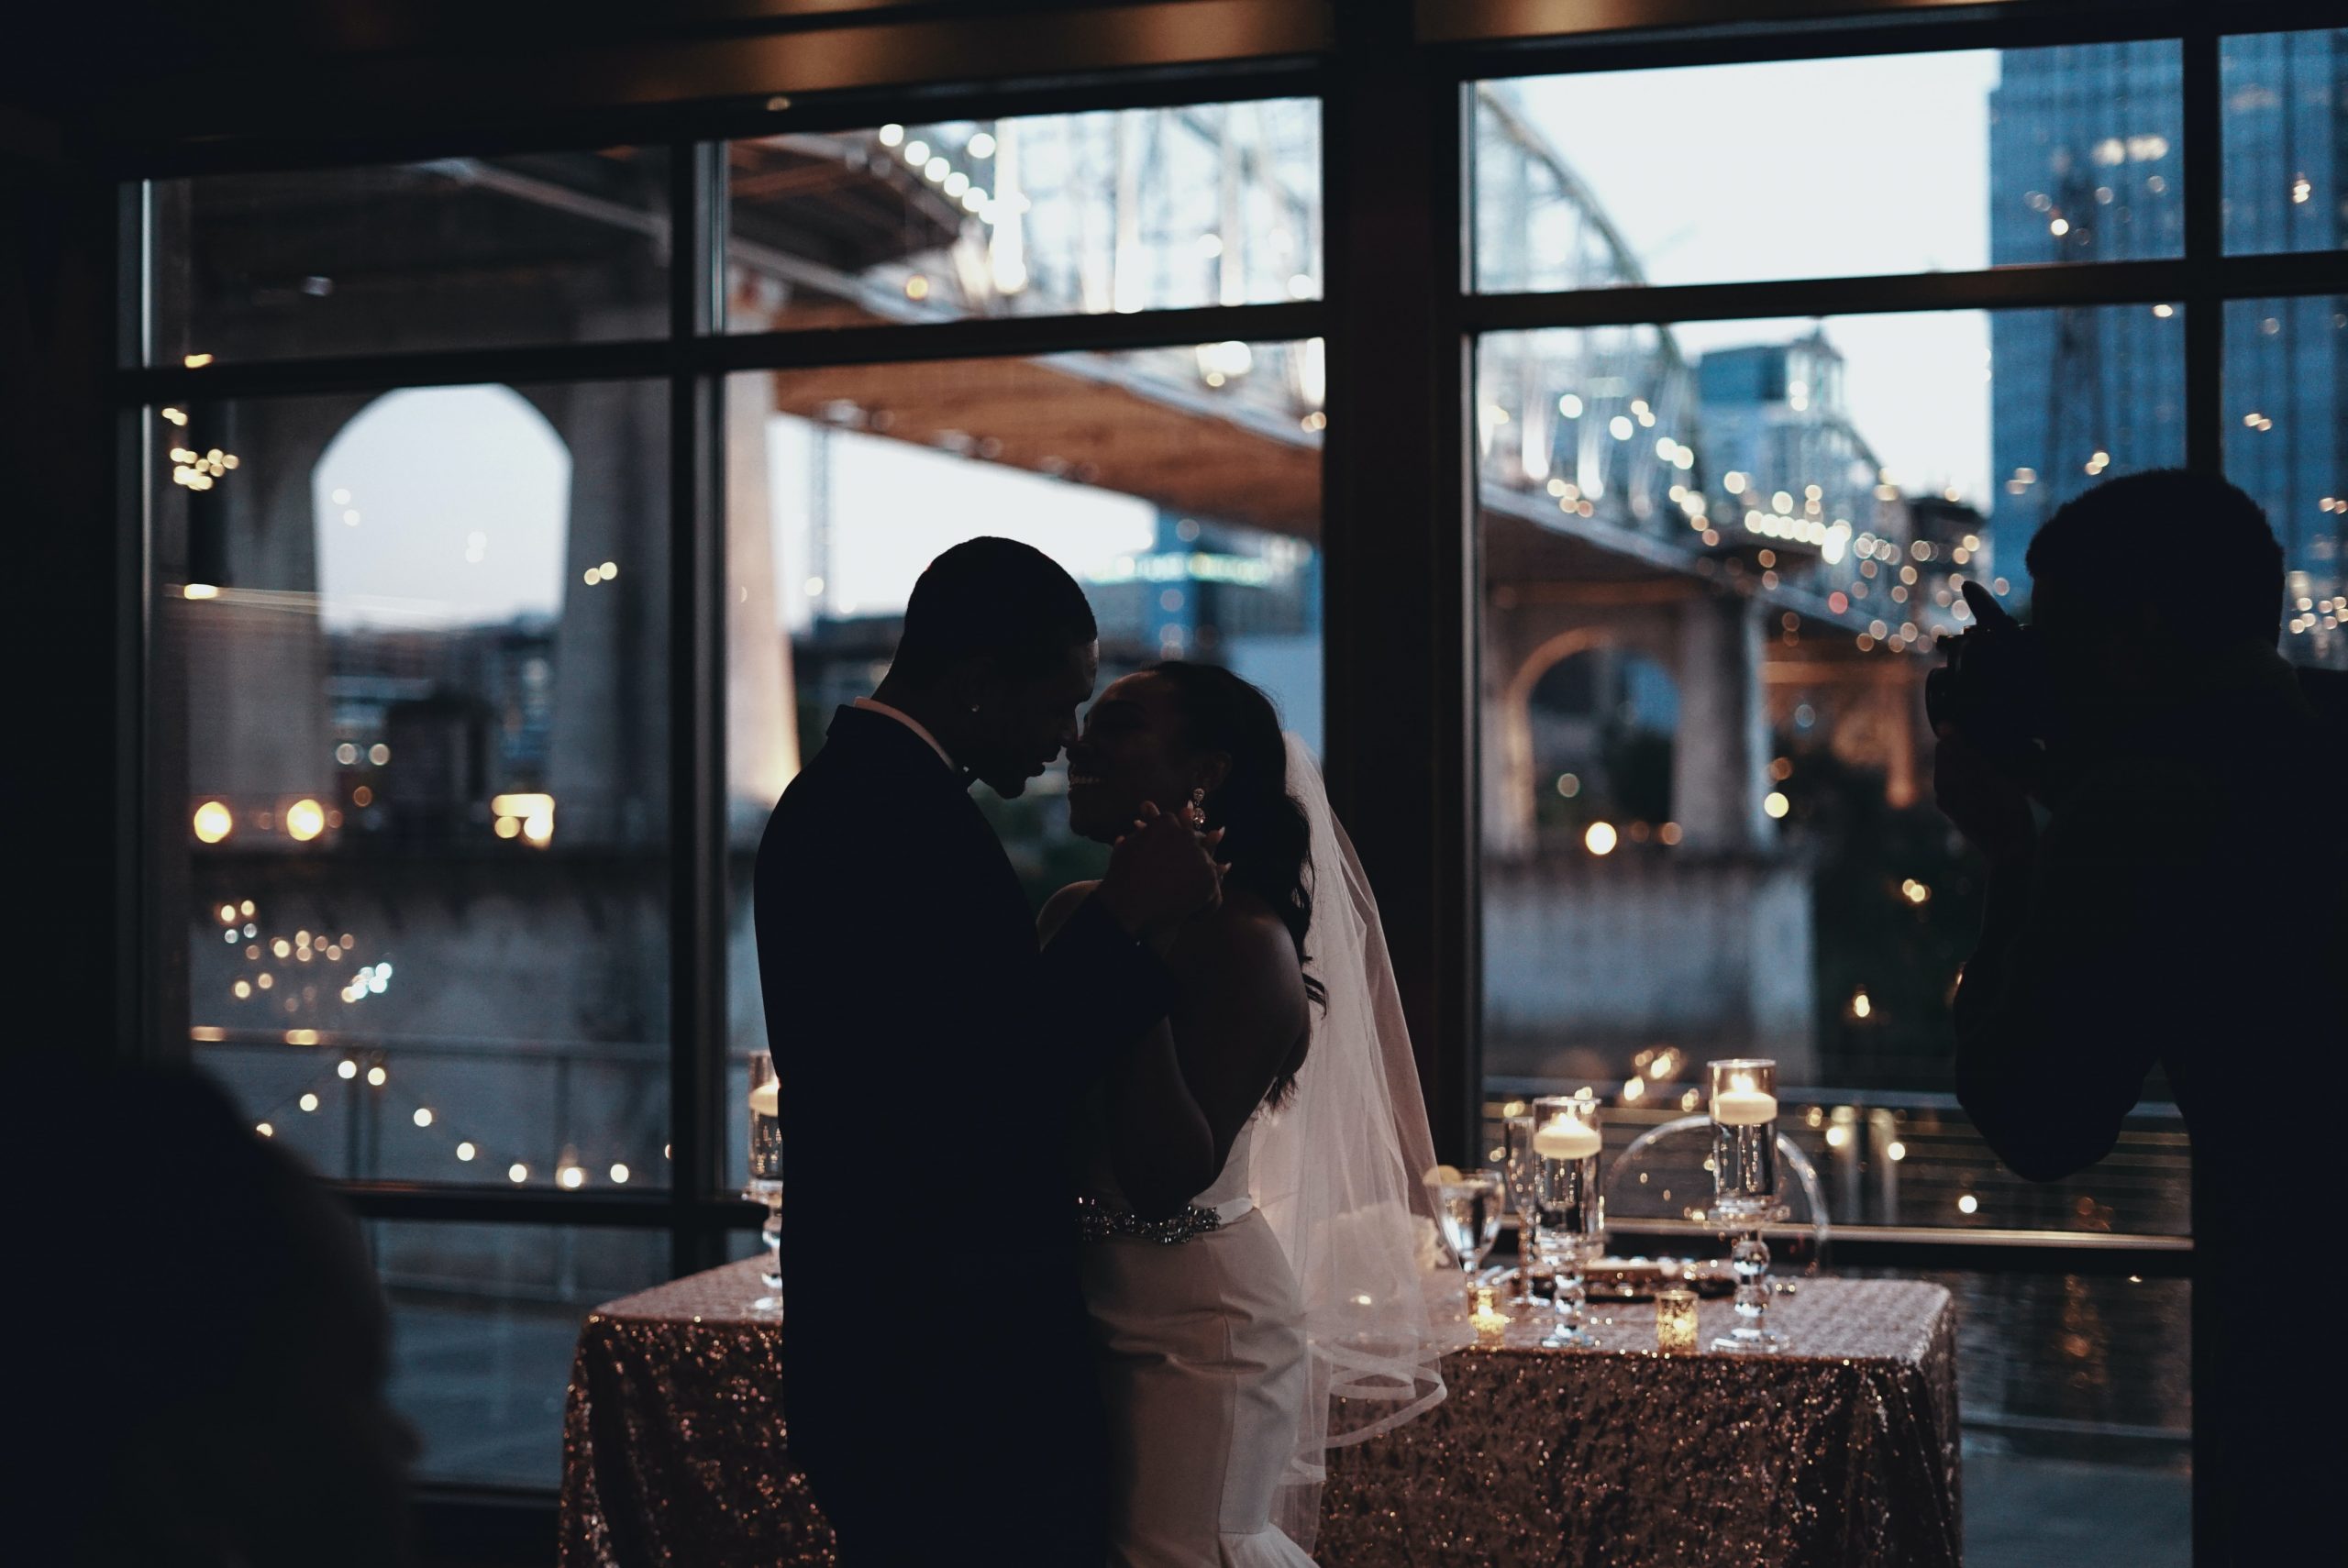 Elevating Wedding Films: Partnering with a Professional Video Editing Company